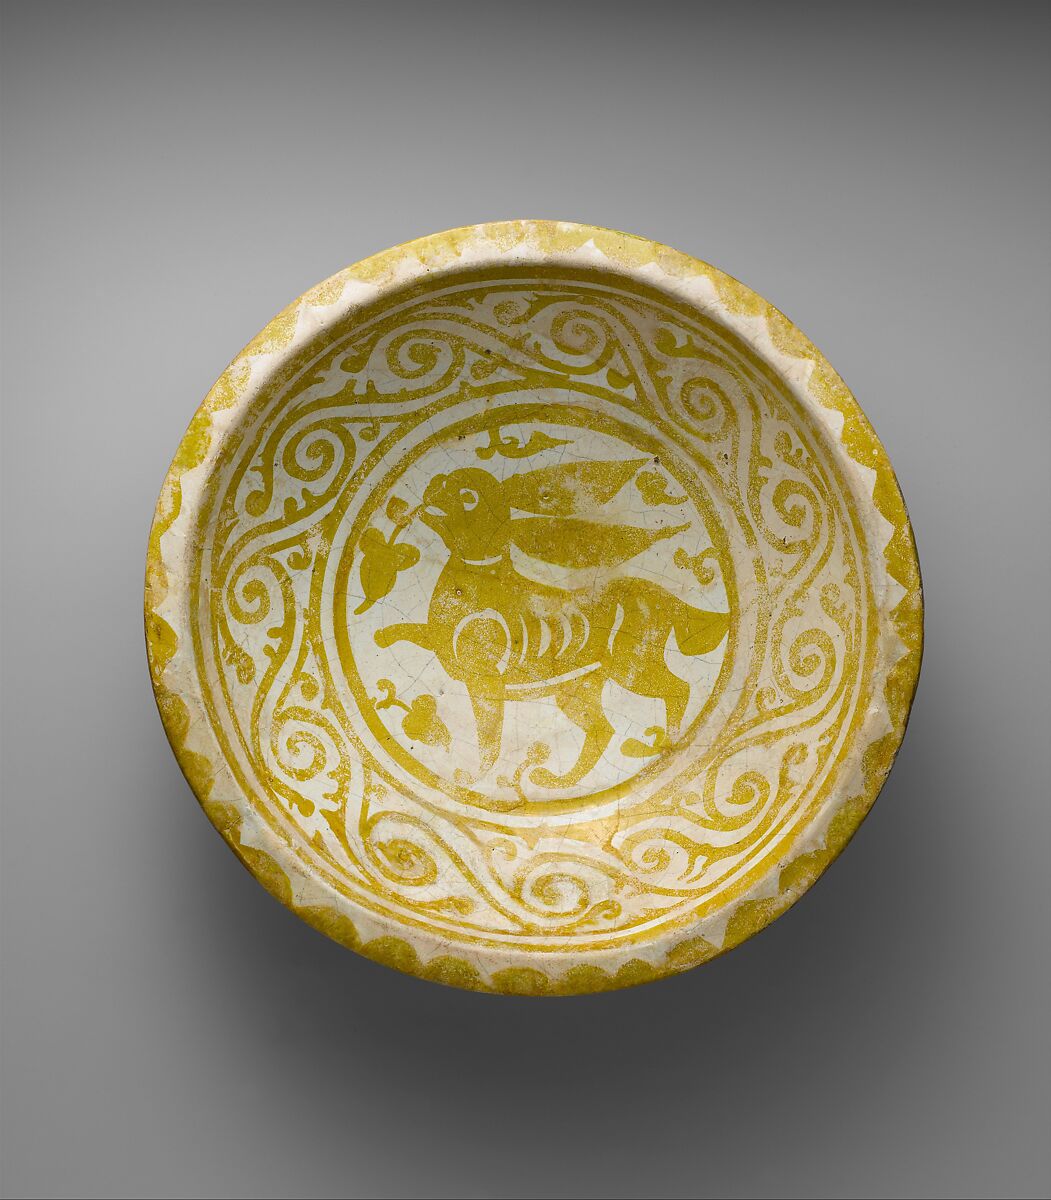 Bowl Depicting a Running Hare, Earthenware; luster-painted on opaque white glaze 